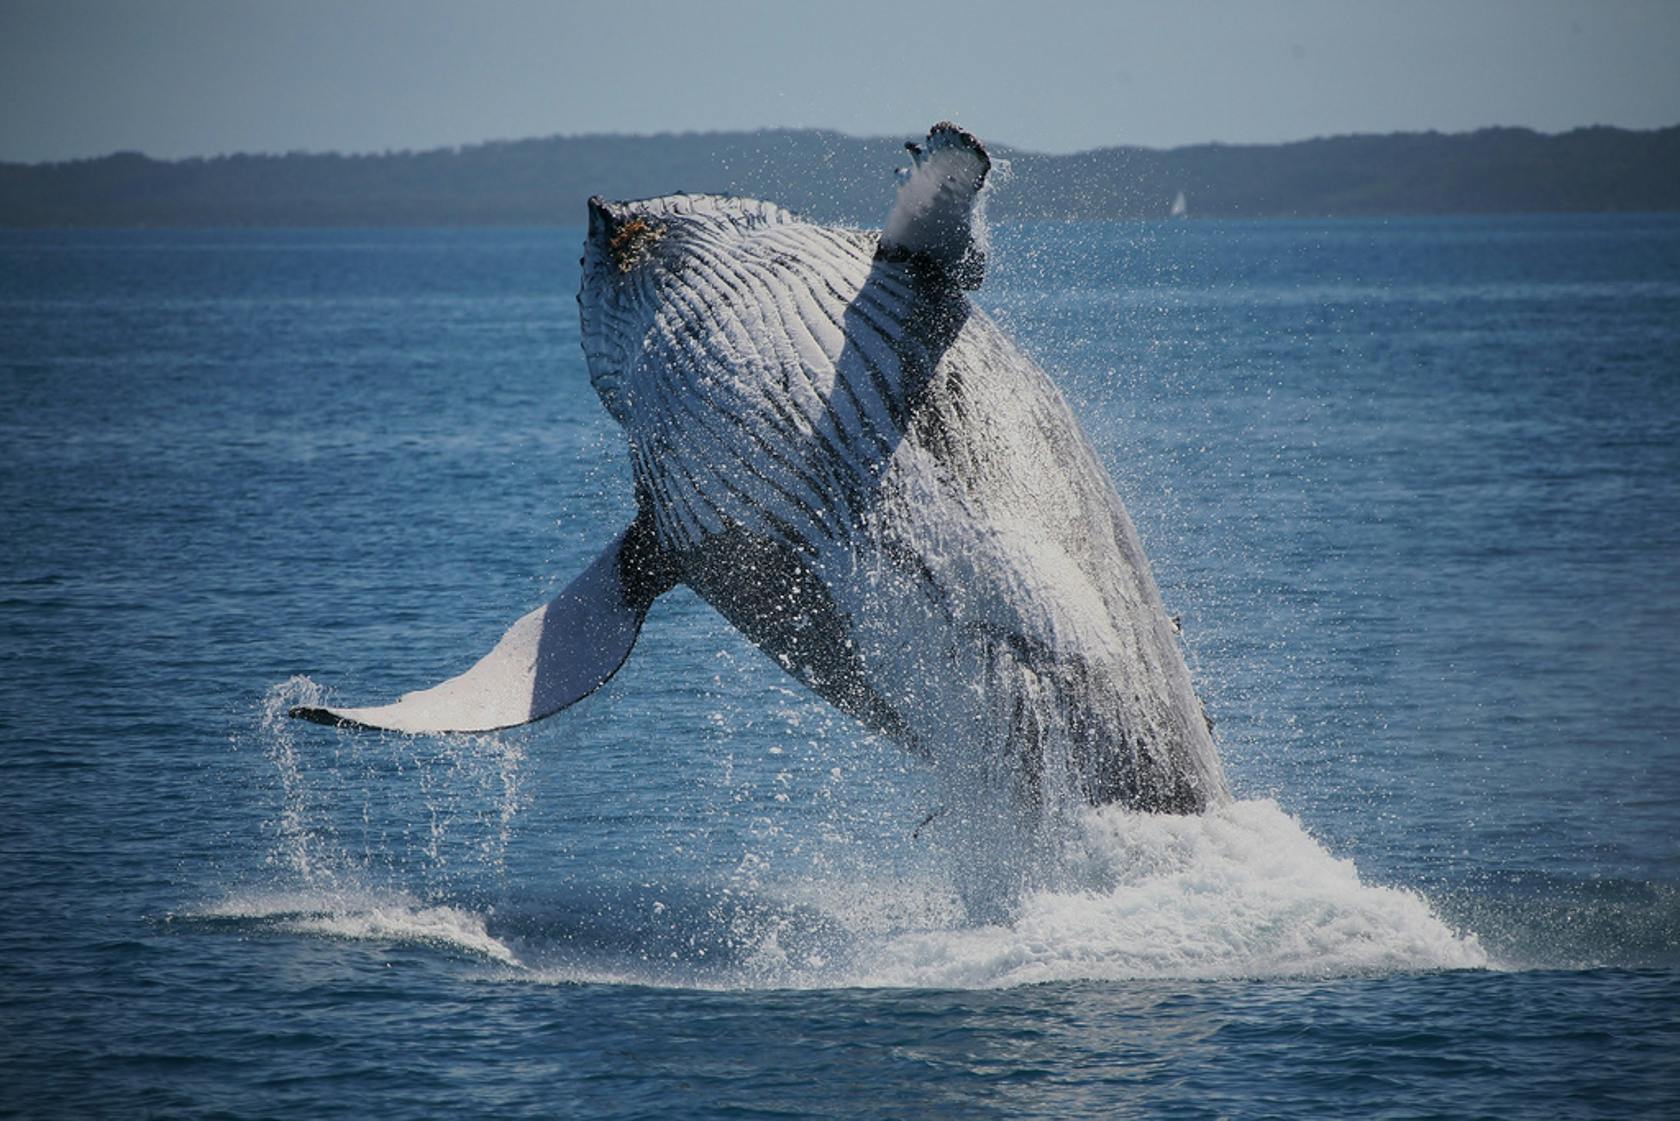 Whales breaching safely in the Bay